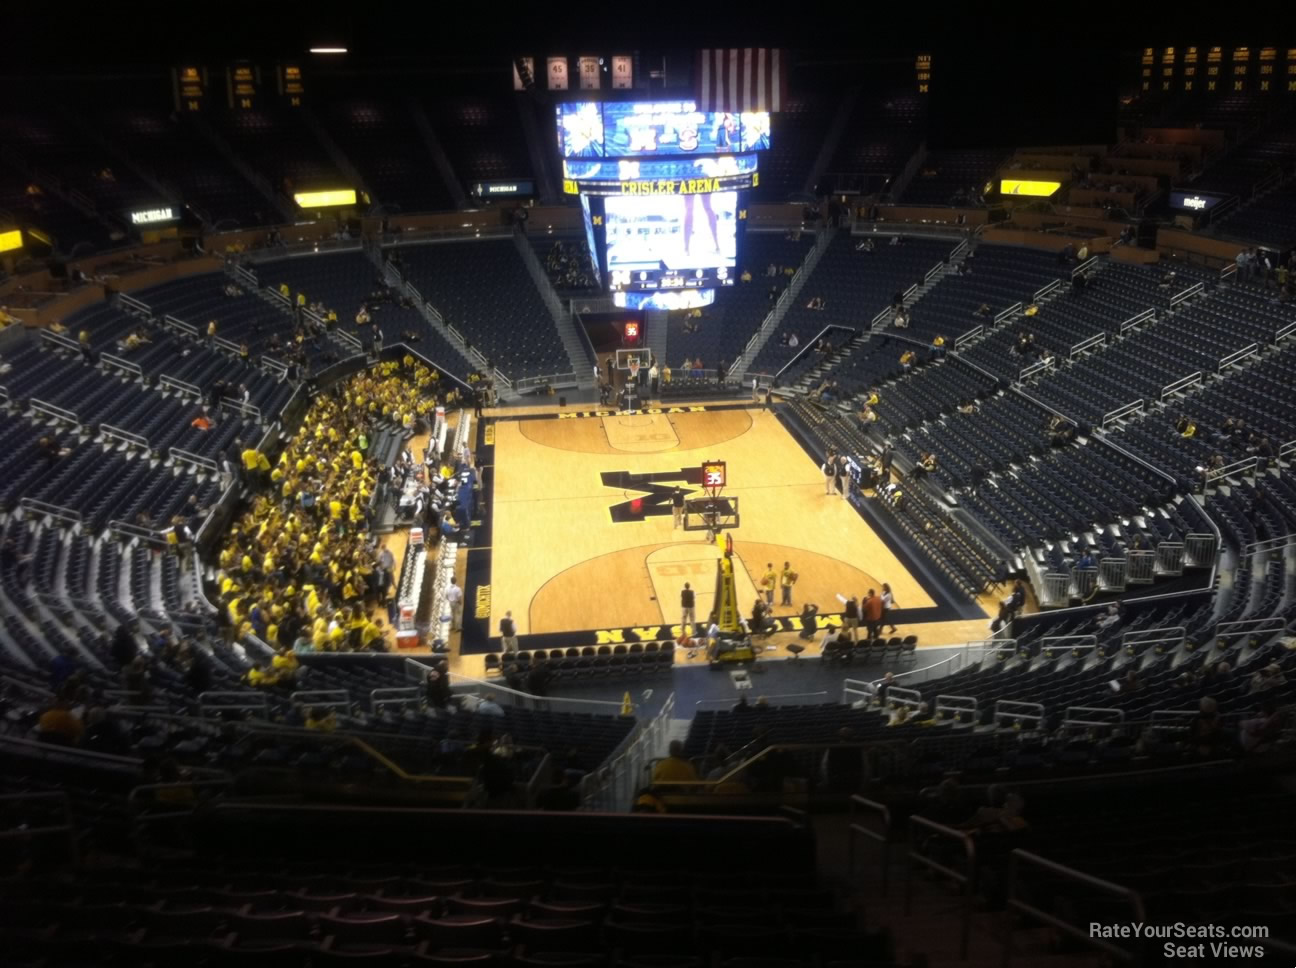 section 215, row 38 seat view  - crisler center